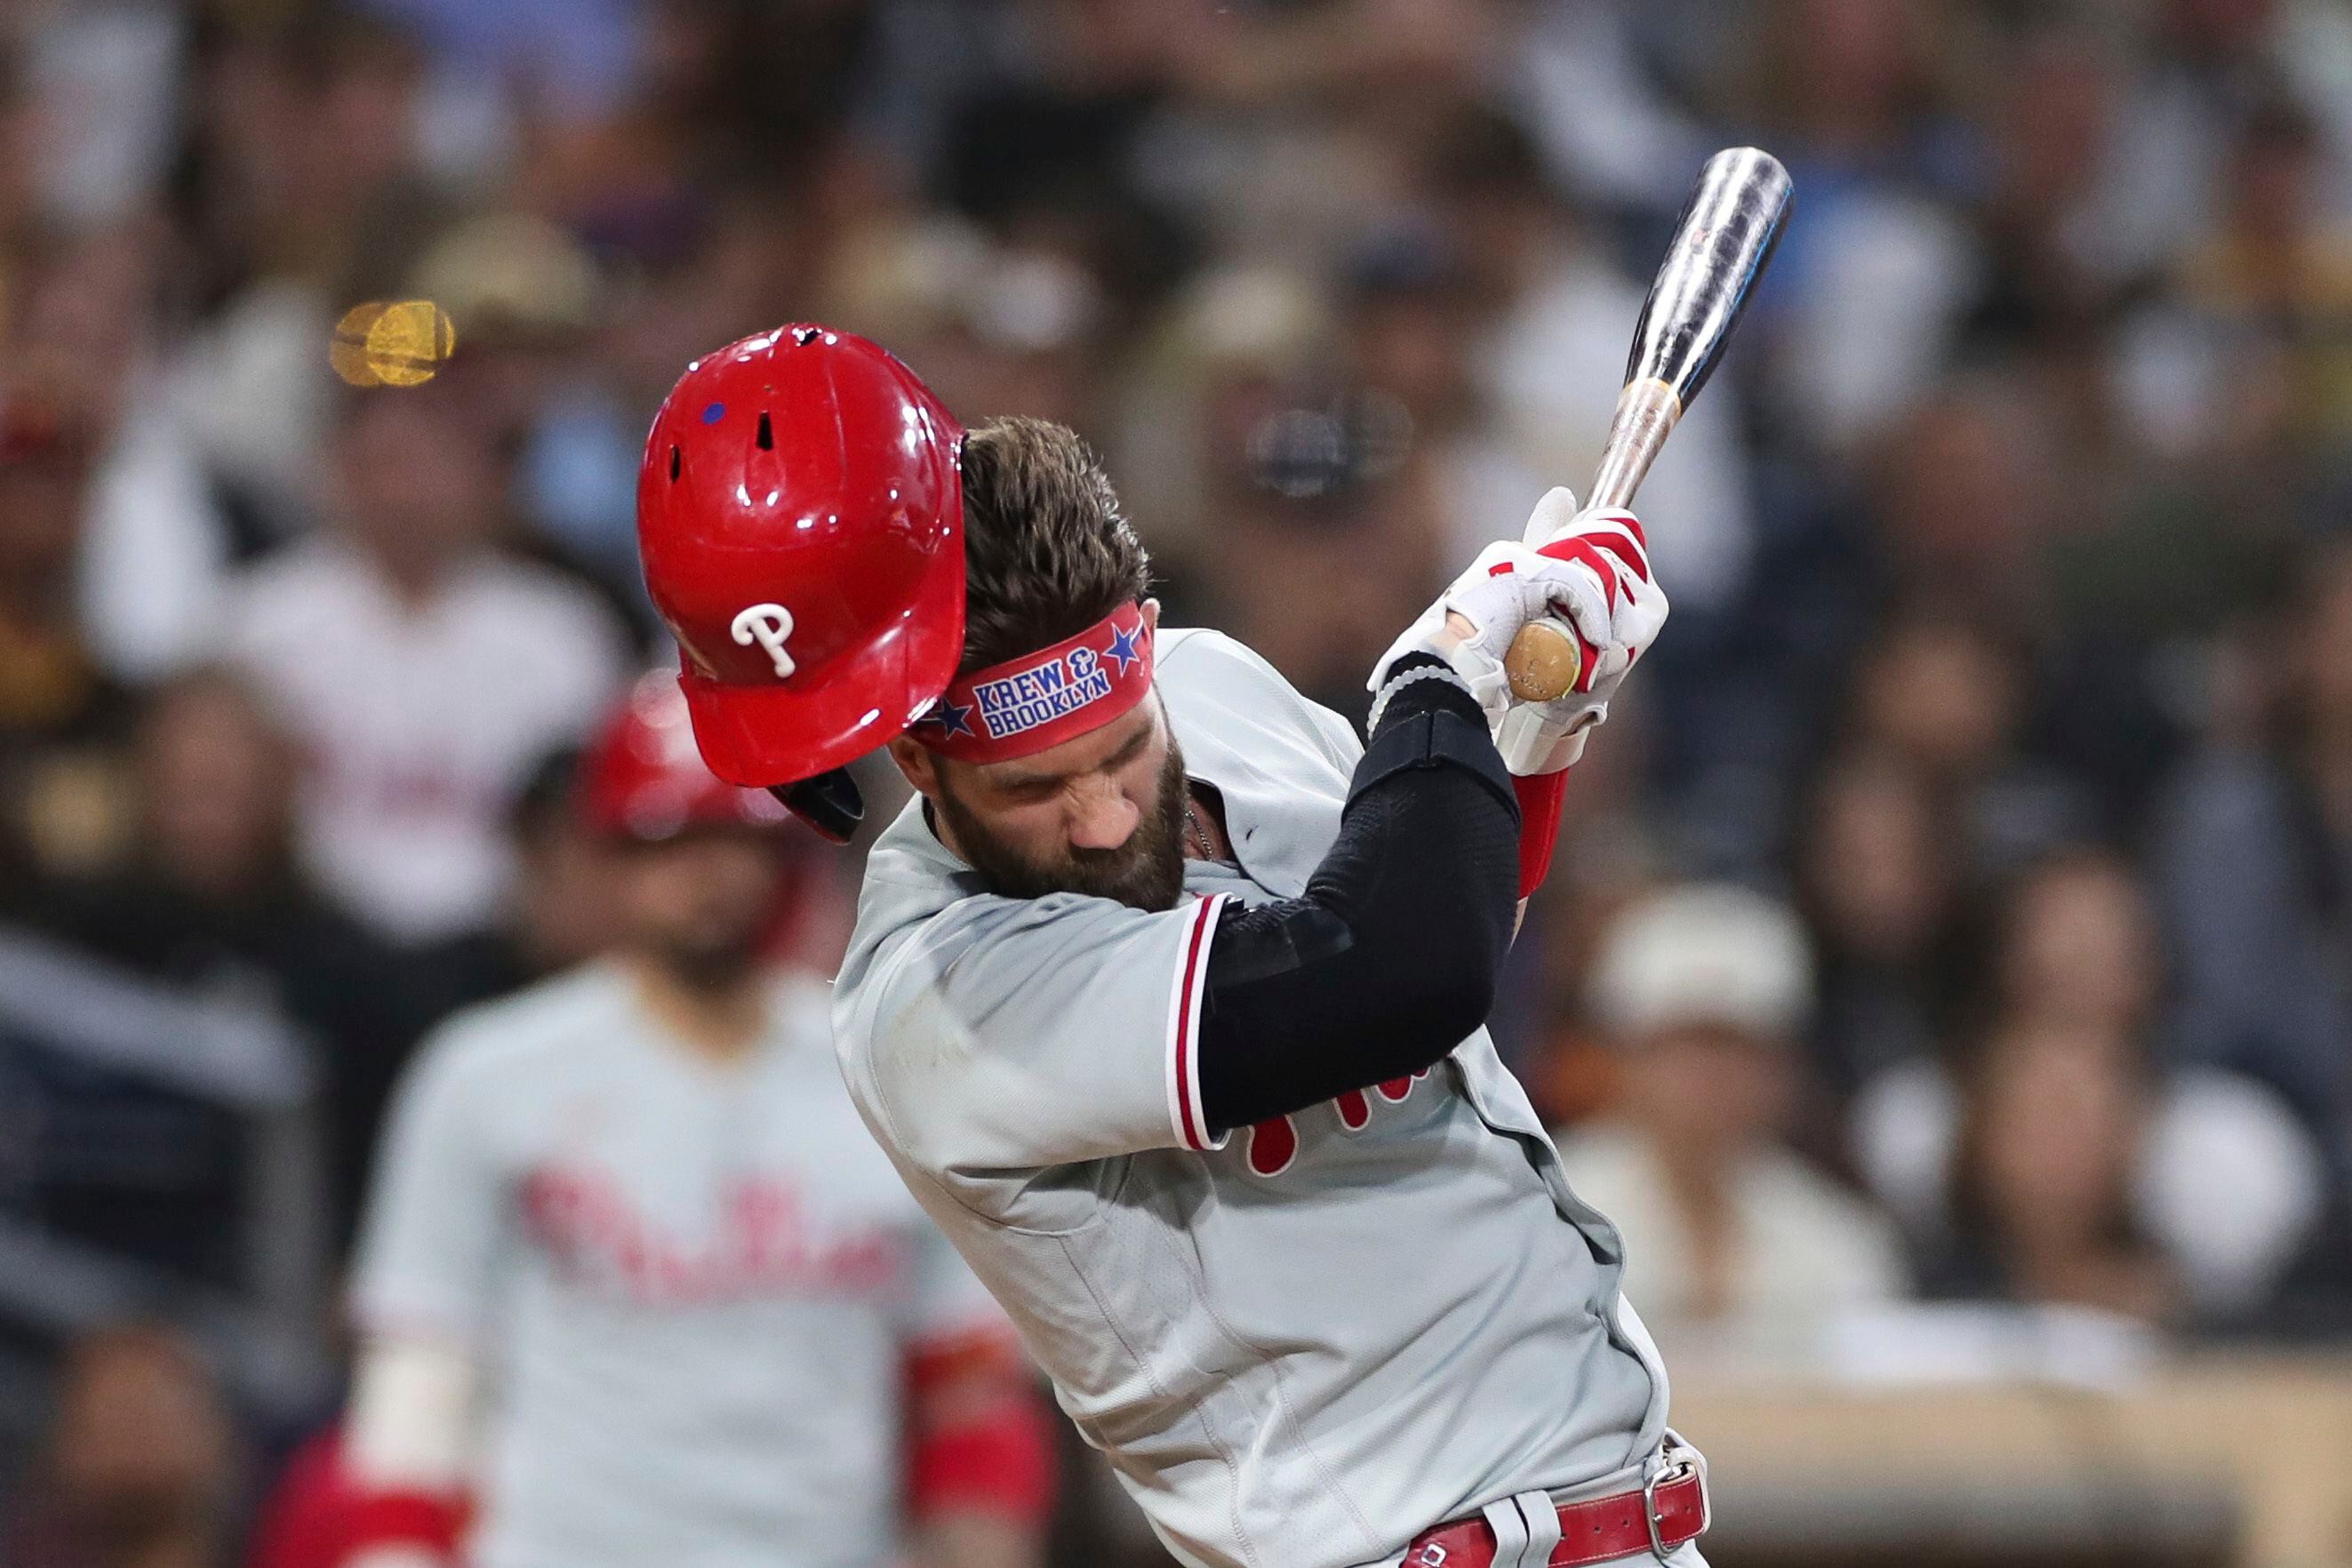 Phillies' Bryce Harper hit by pitch in face, 'feels good' - NBC Sports